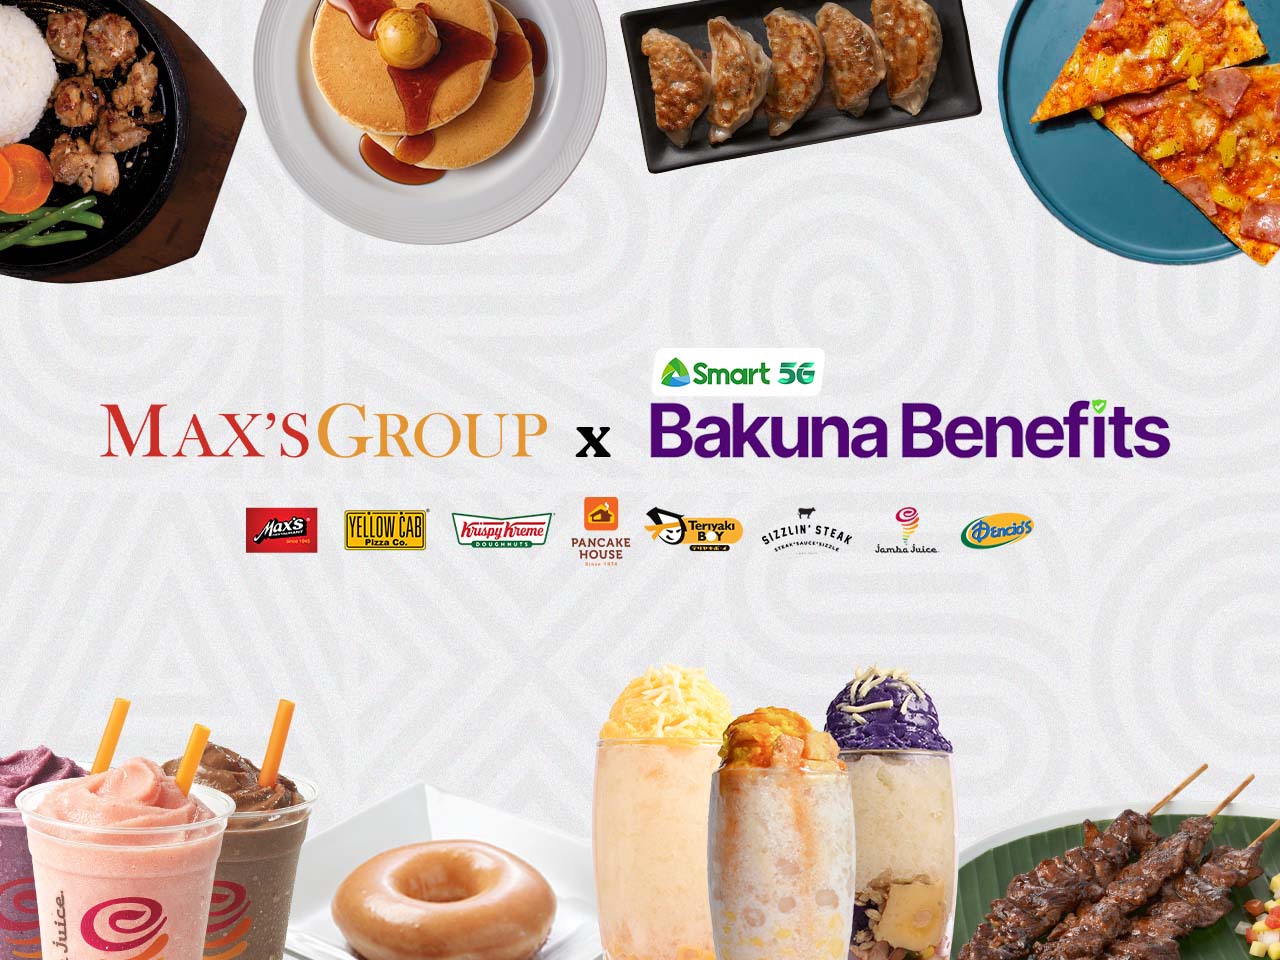 Got Vaccinated? Get these well-deserved treats from Max’s Group for doing your part